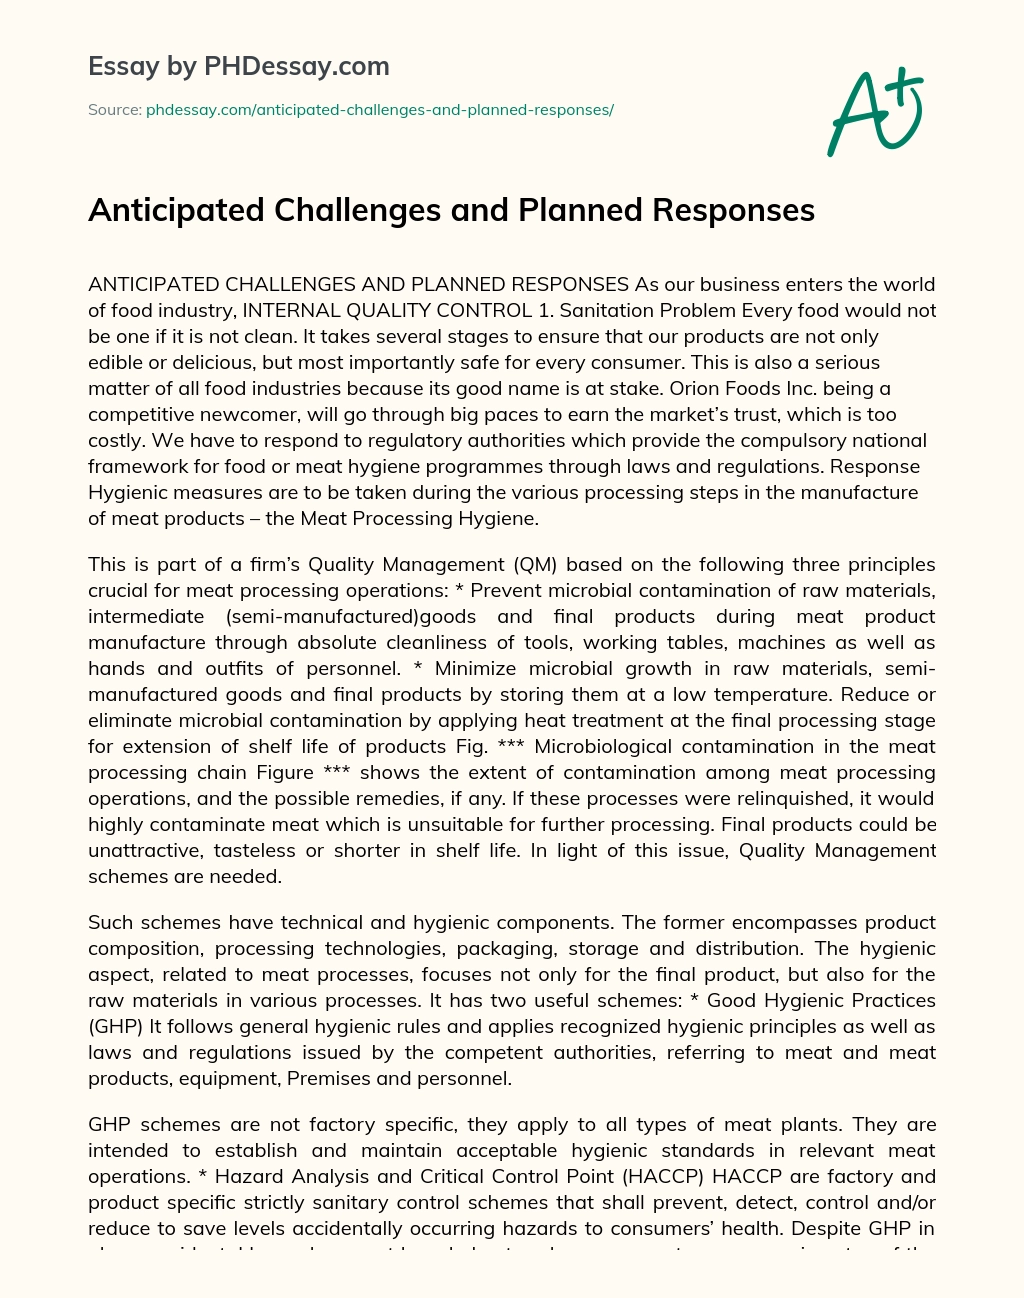 Anticipated Challenges and Planned Responses essay